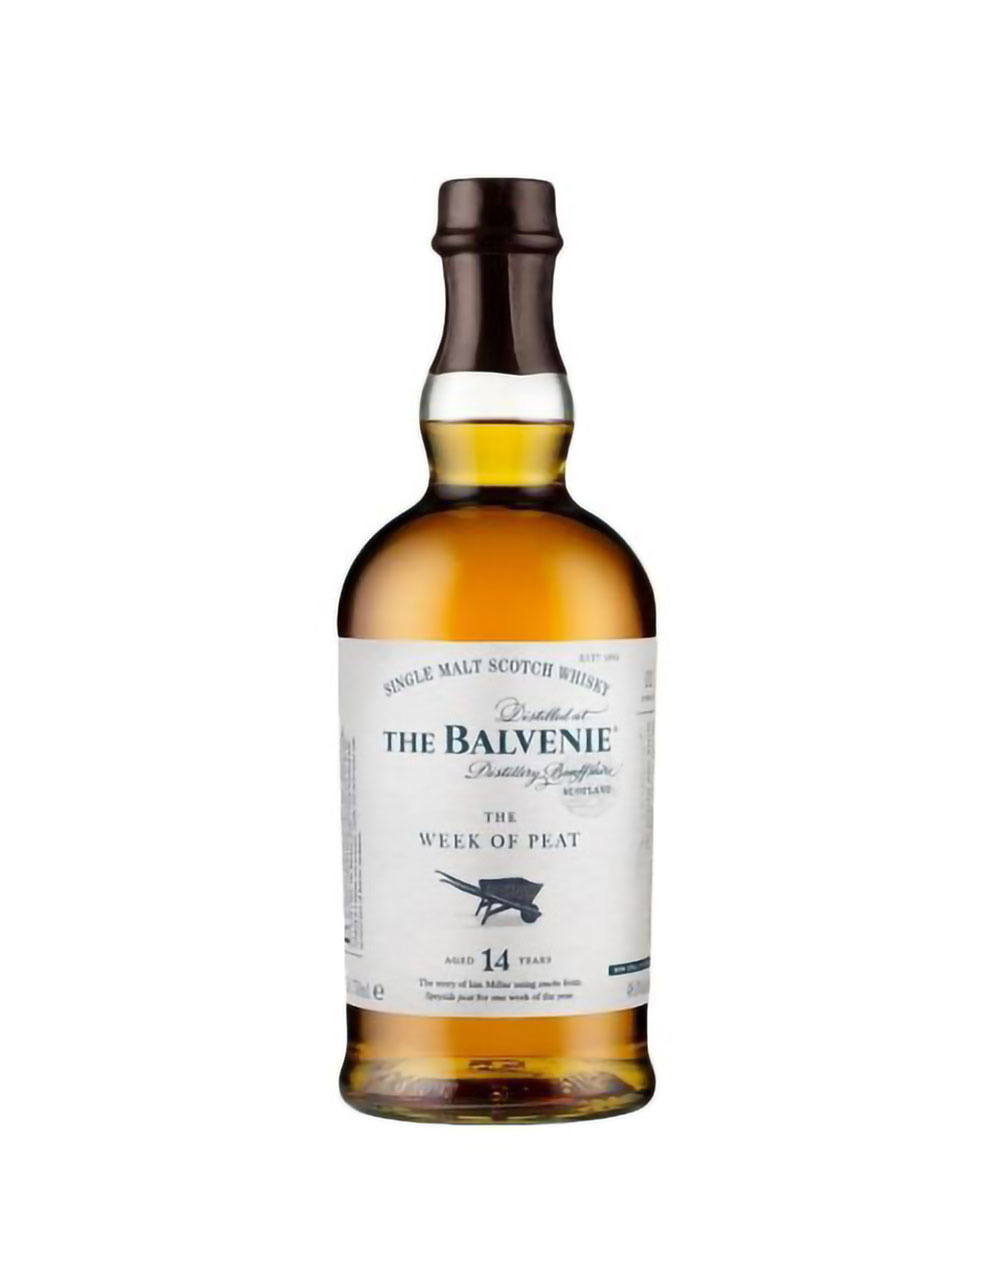 The Balvenie The Week of Peat 14 Year Old Single Malt Scotch Whisky